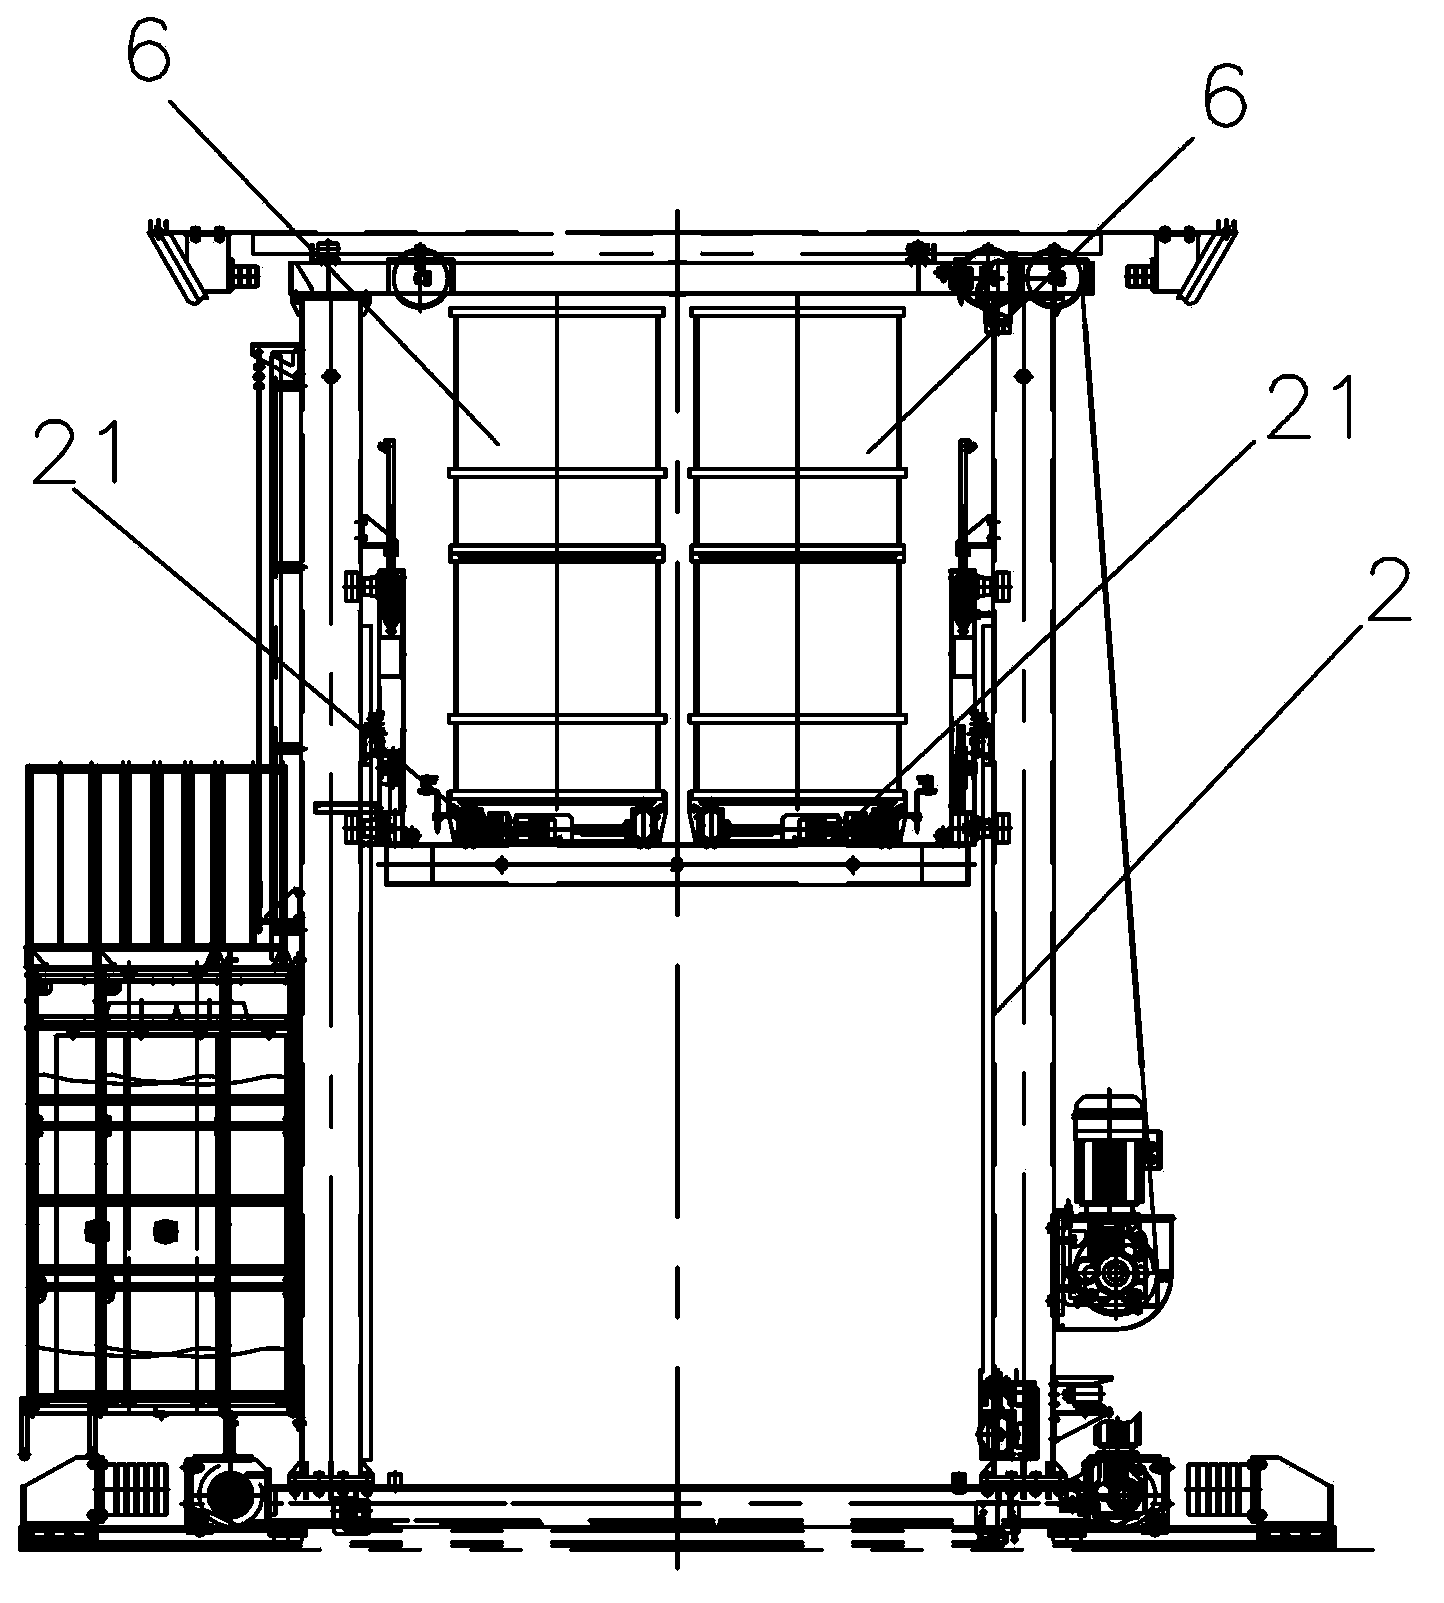 Cut tobacco box storage and delivery conveying system